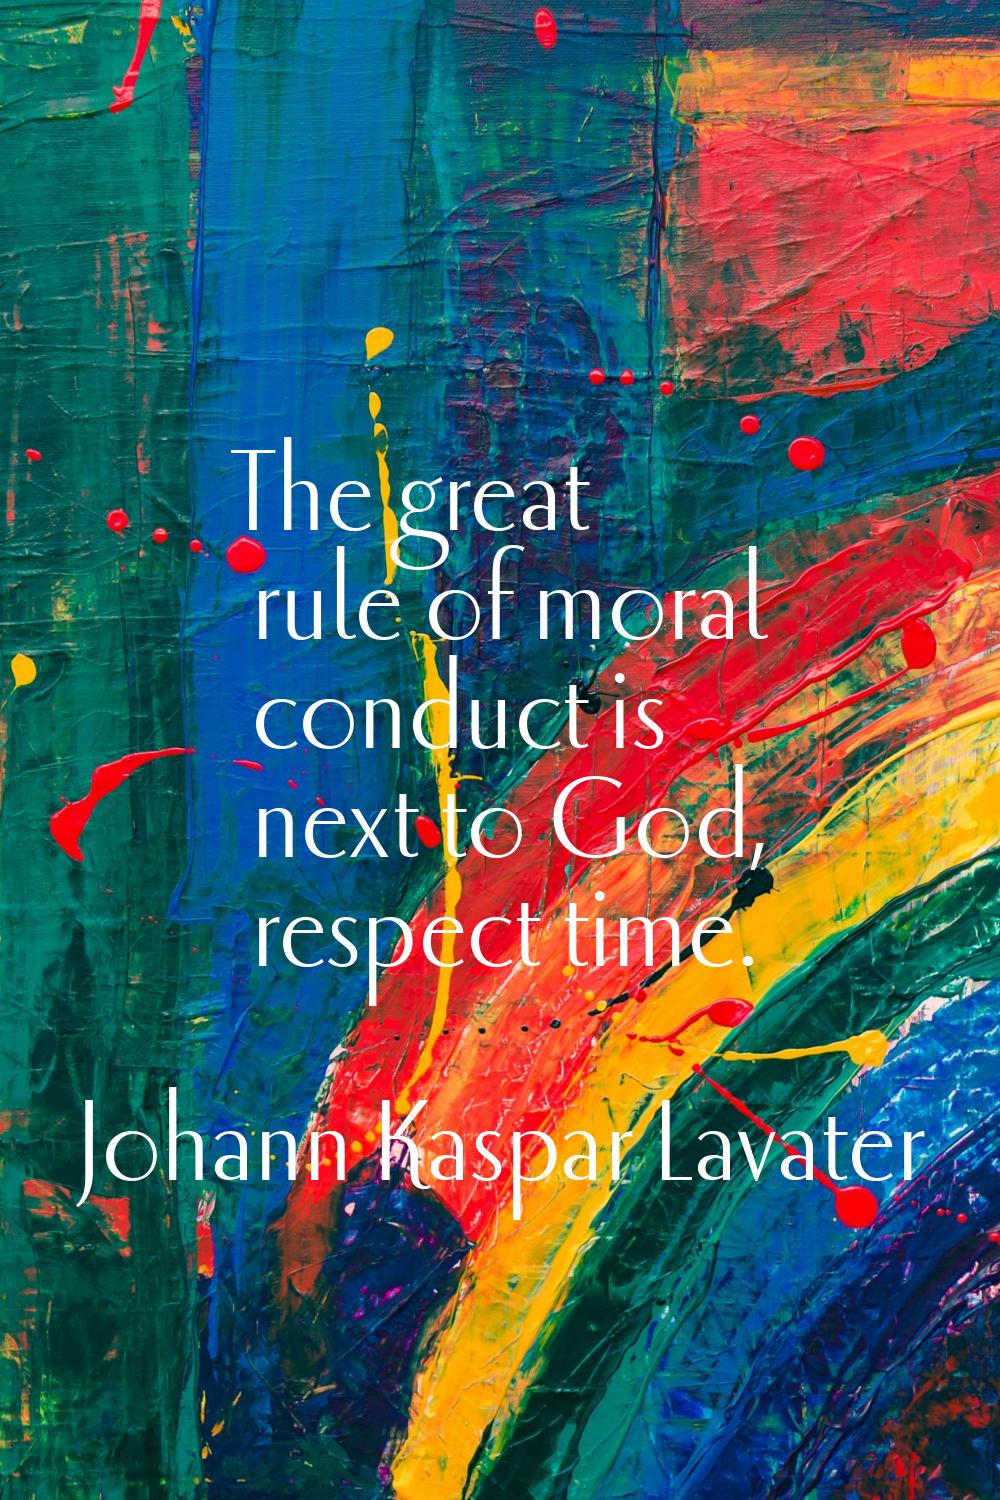 The great rule of moral conduct is next to God, respect time.